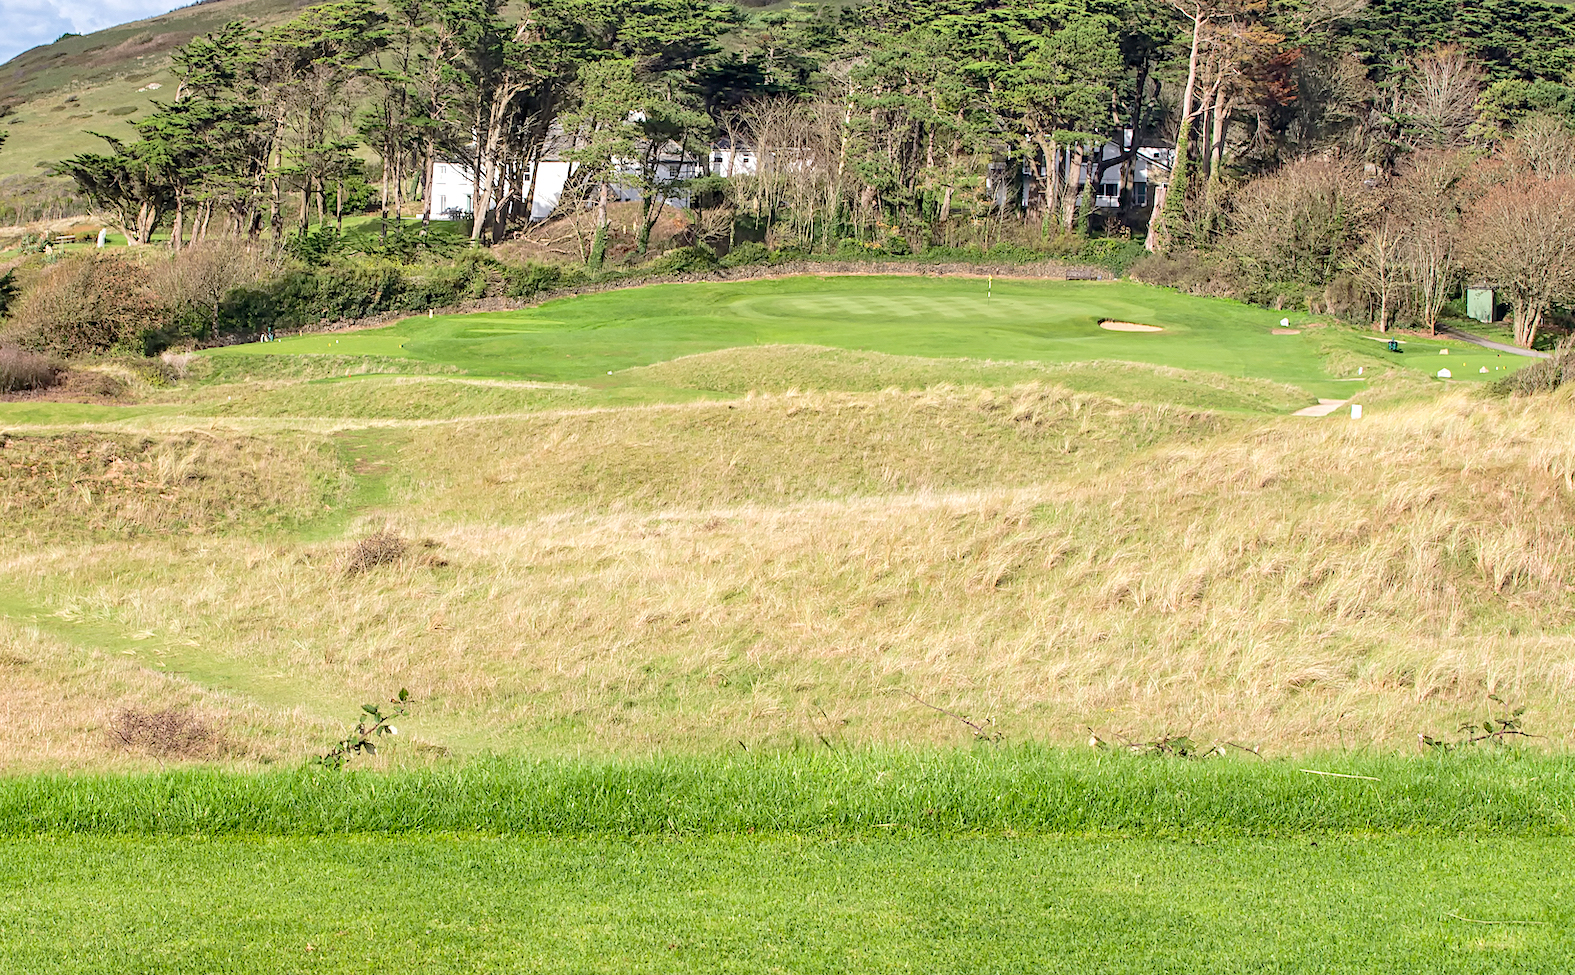 The view down the ninth hole at St Enodoc